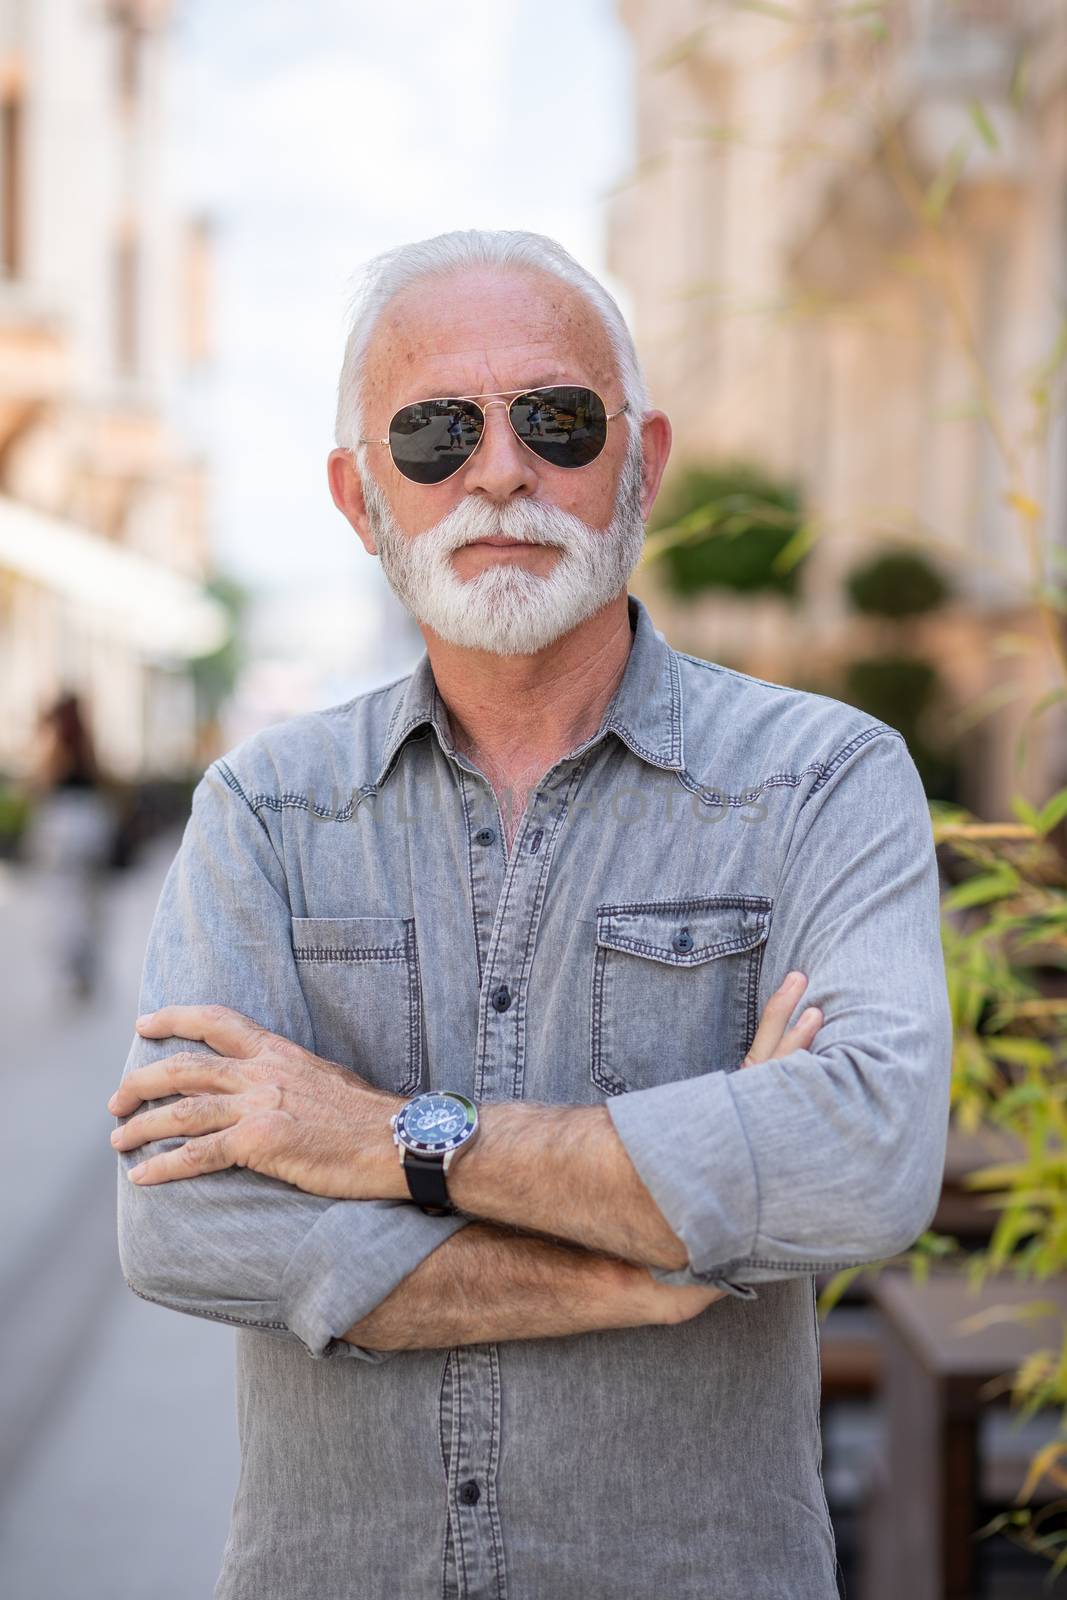 Old rich man with sun glasses and beard on street portrait by adamr